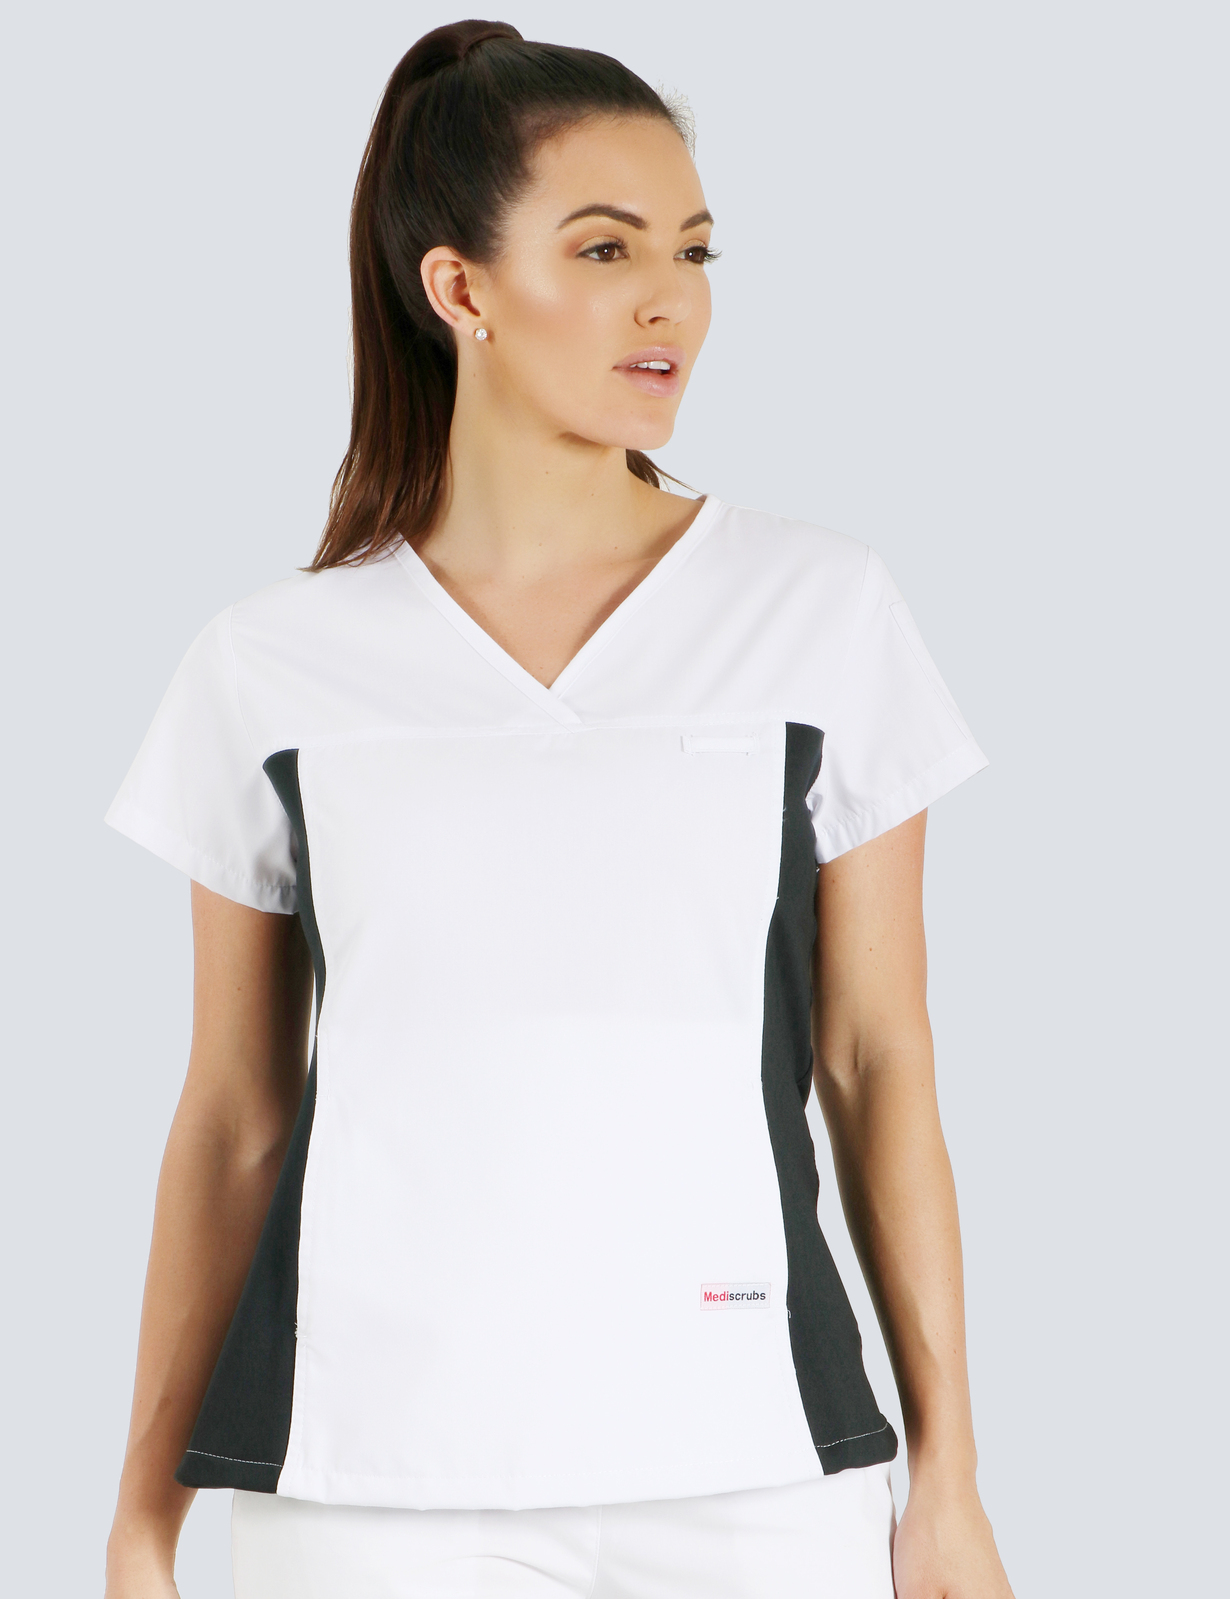 Ashmore Retreat Registered Nurse Top Only Bundle (Women's Fit Spandex in White incl Logo) 